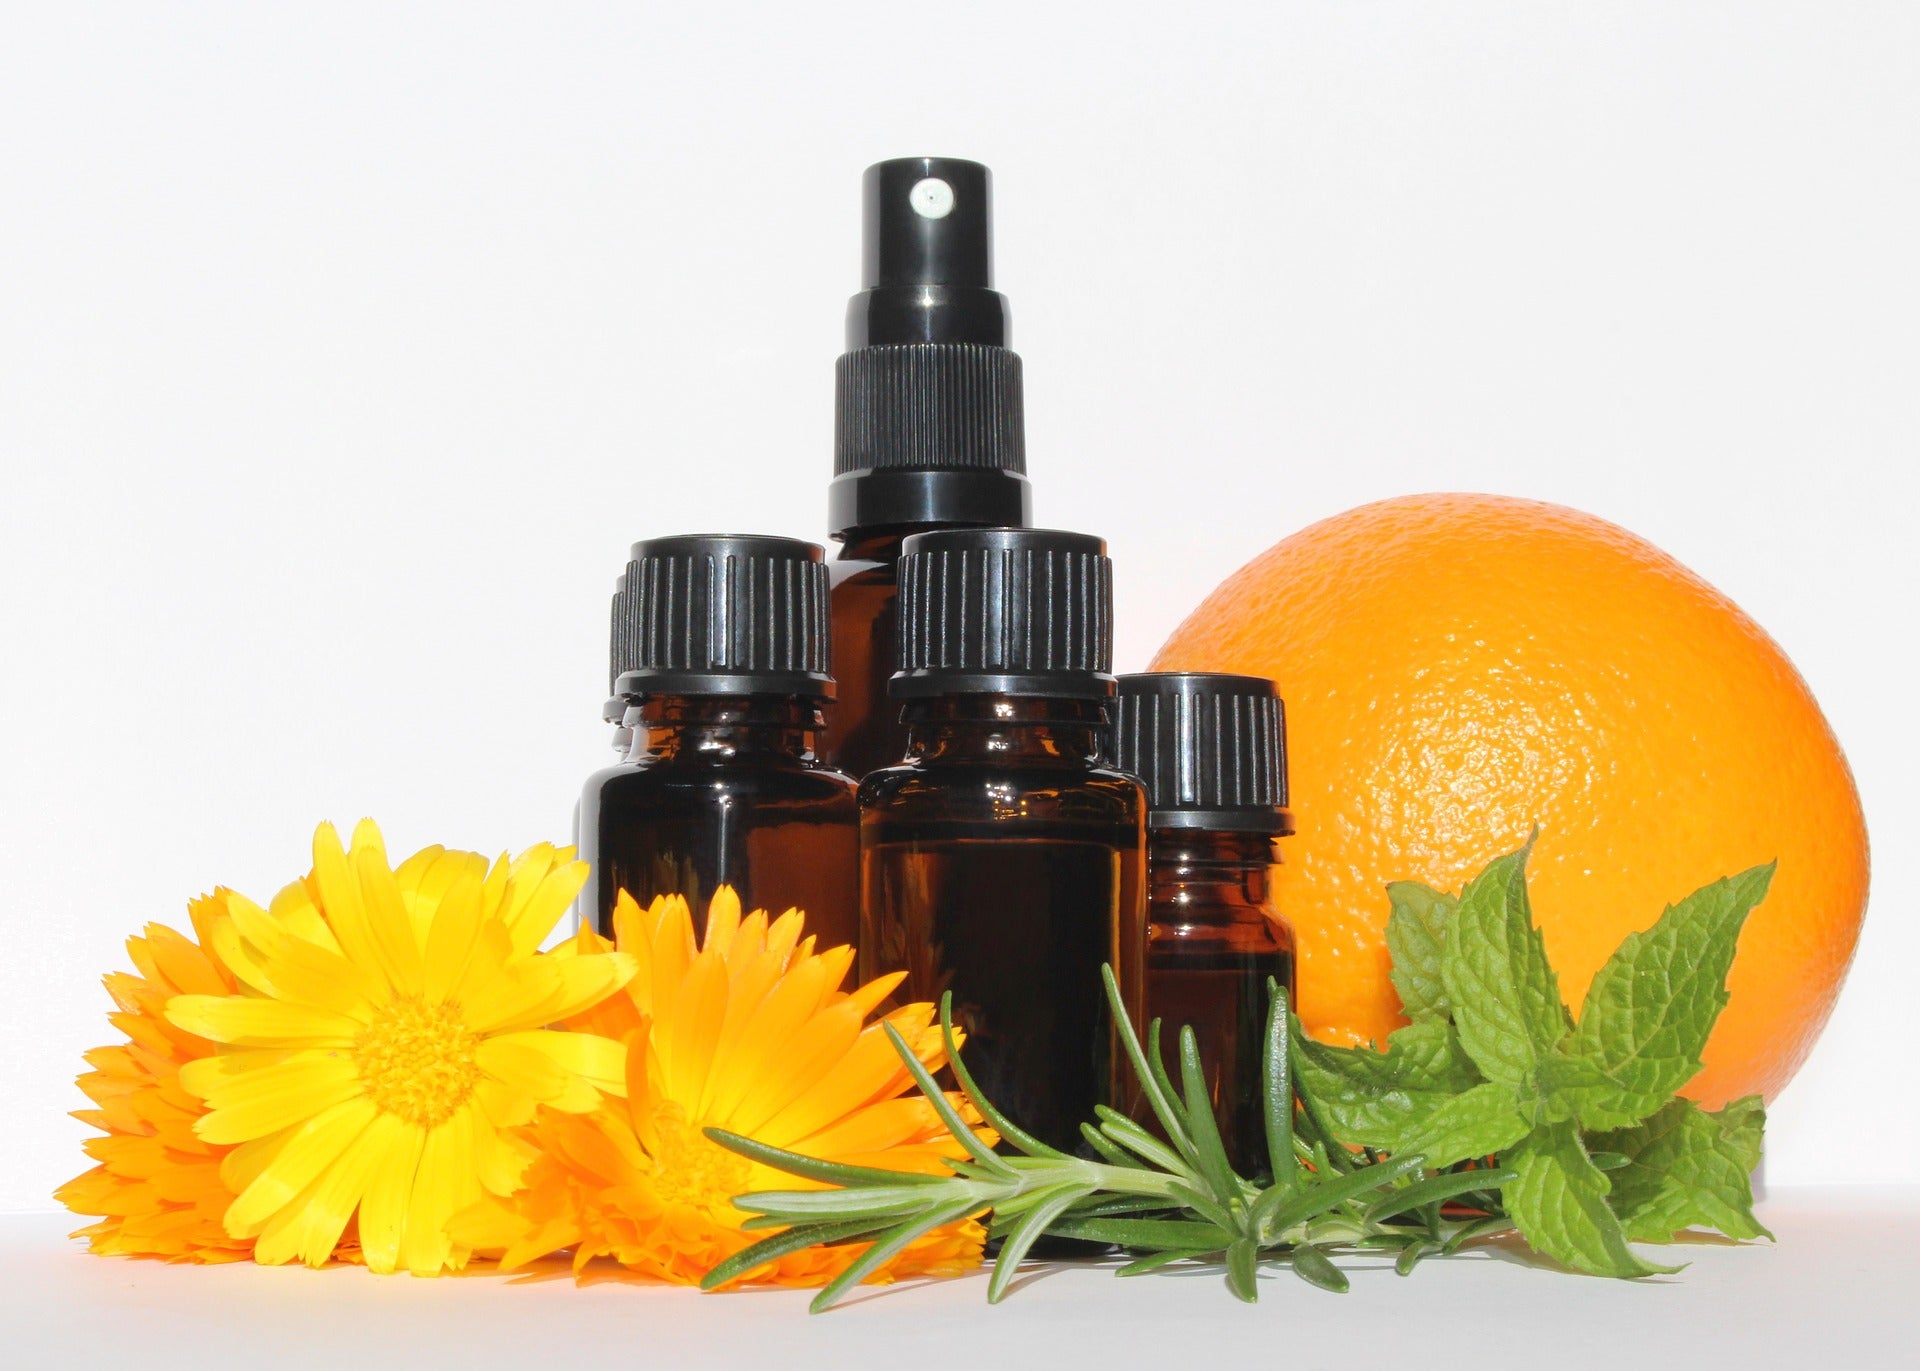 Benefits of Aromatherapy and Essential Oils - The Therapist Essentials